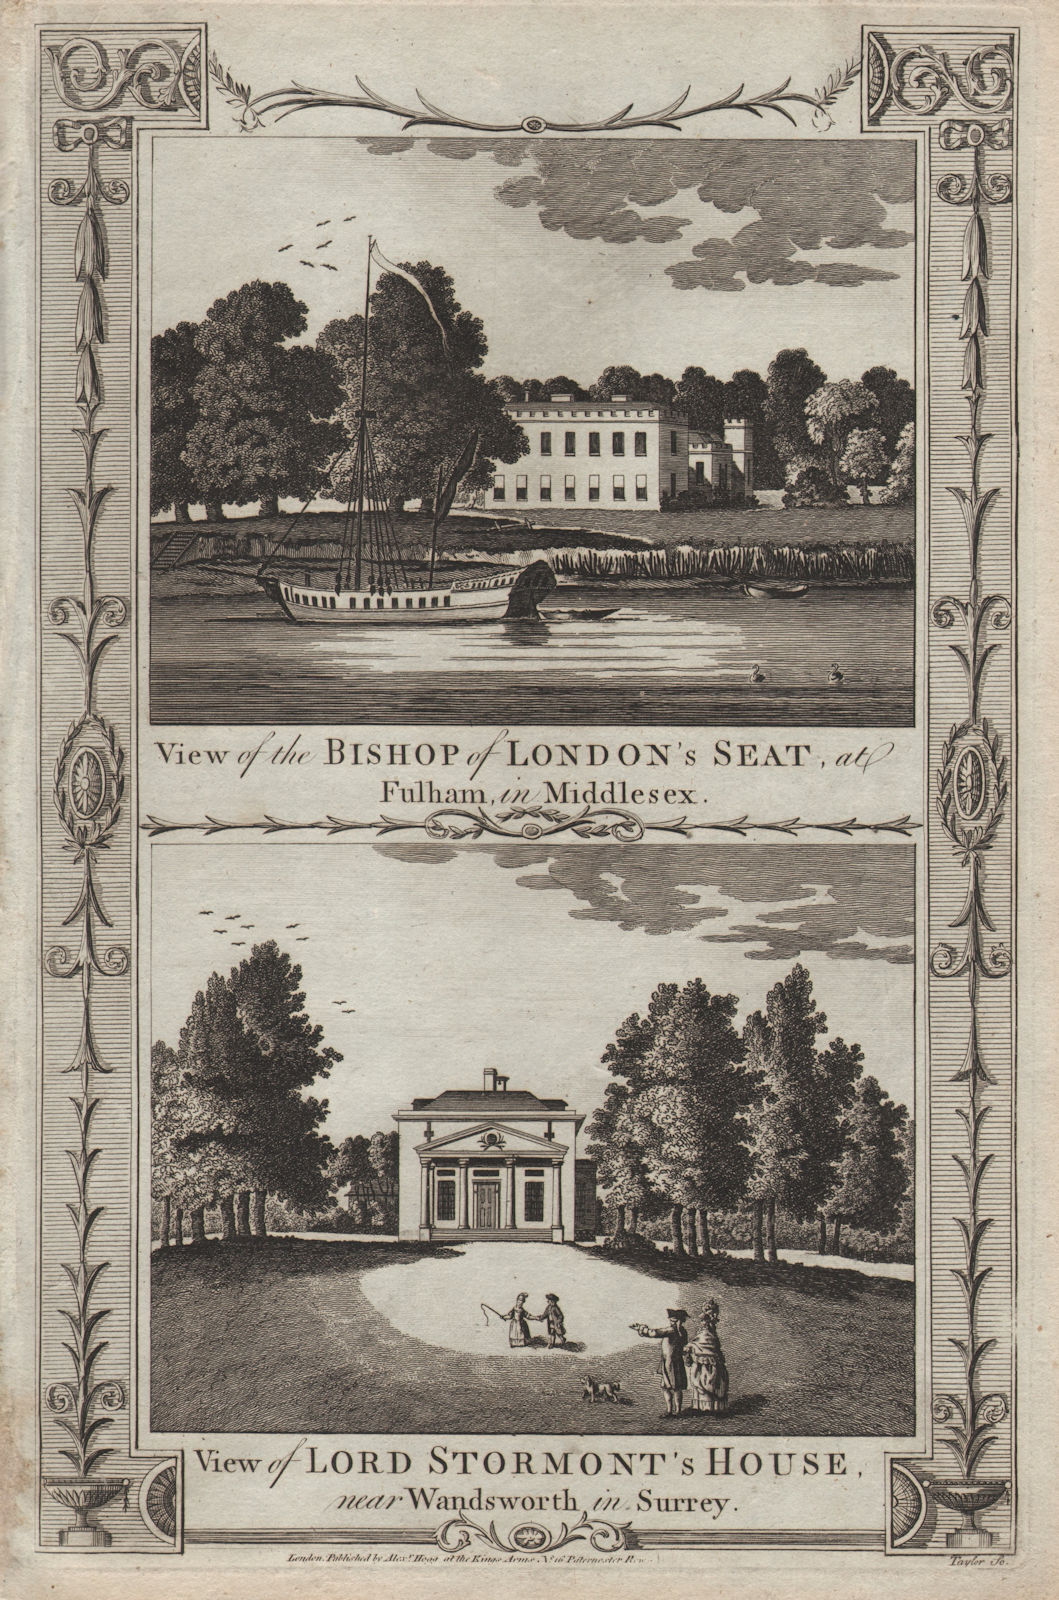 Associate Product Fulham Palace. Lord Stormont's house, Wandsworth. THORNTON 1784 old print